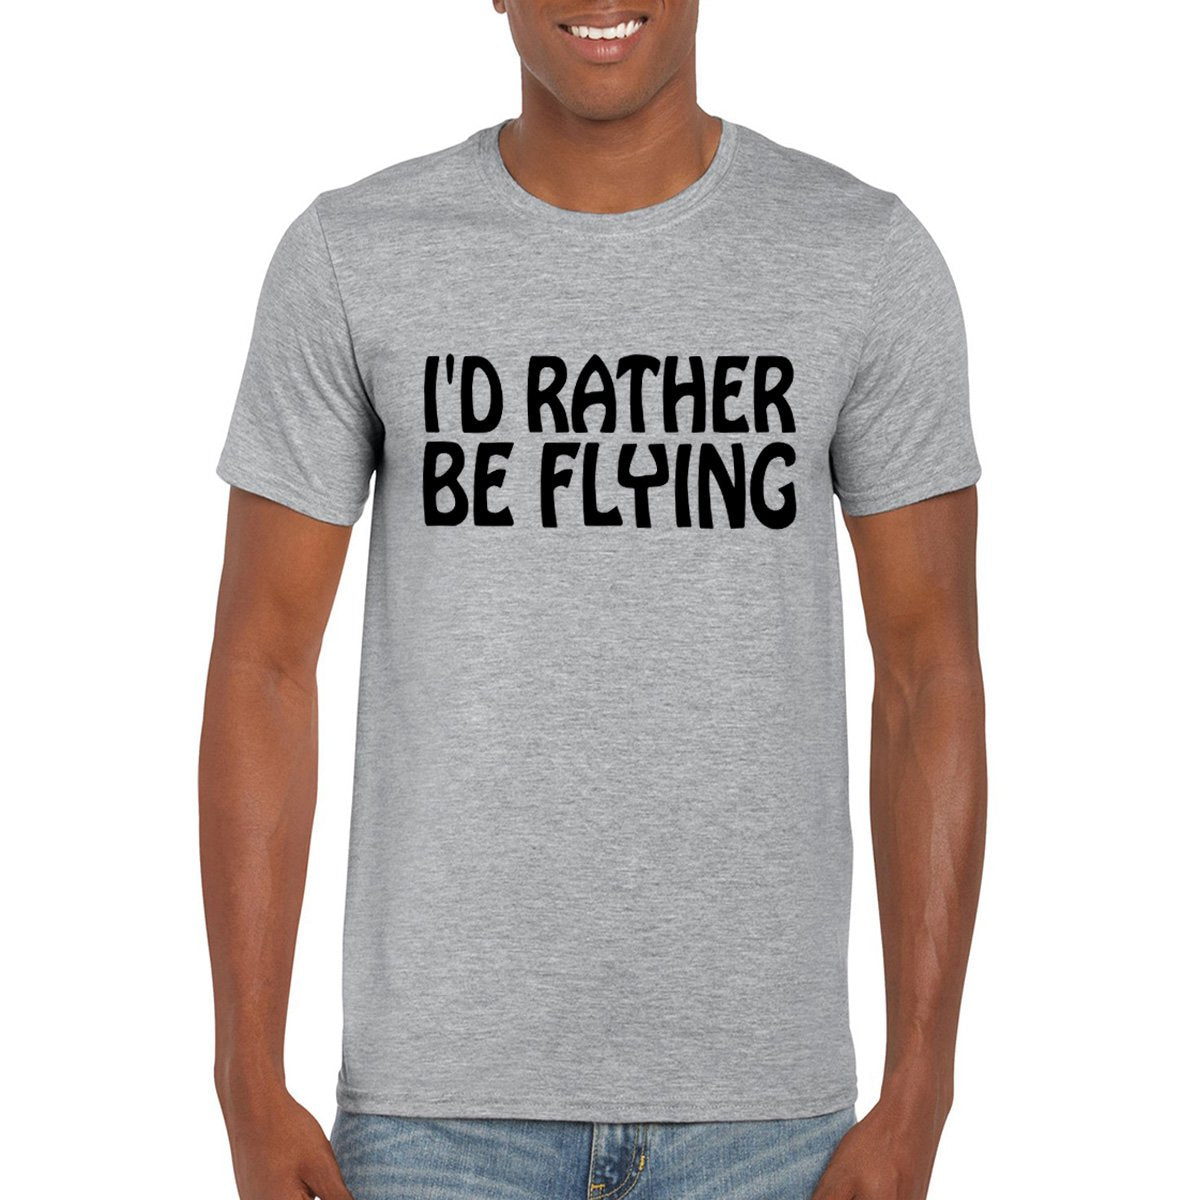 I'D RATHER BE FLYING Unisex Semi-Fitted T-Shirt